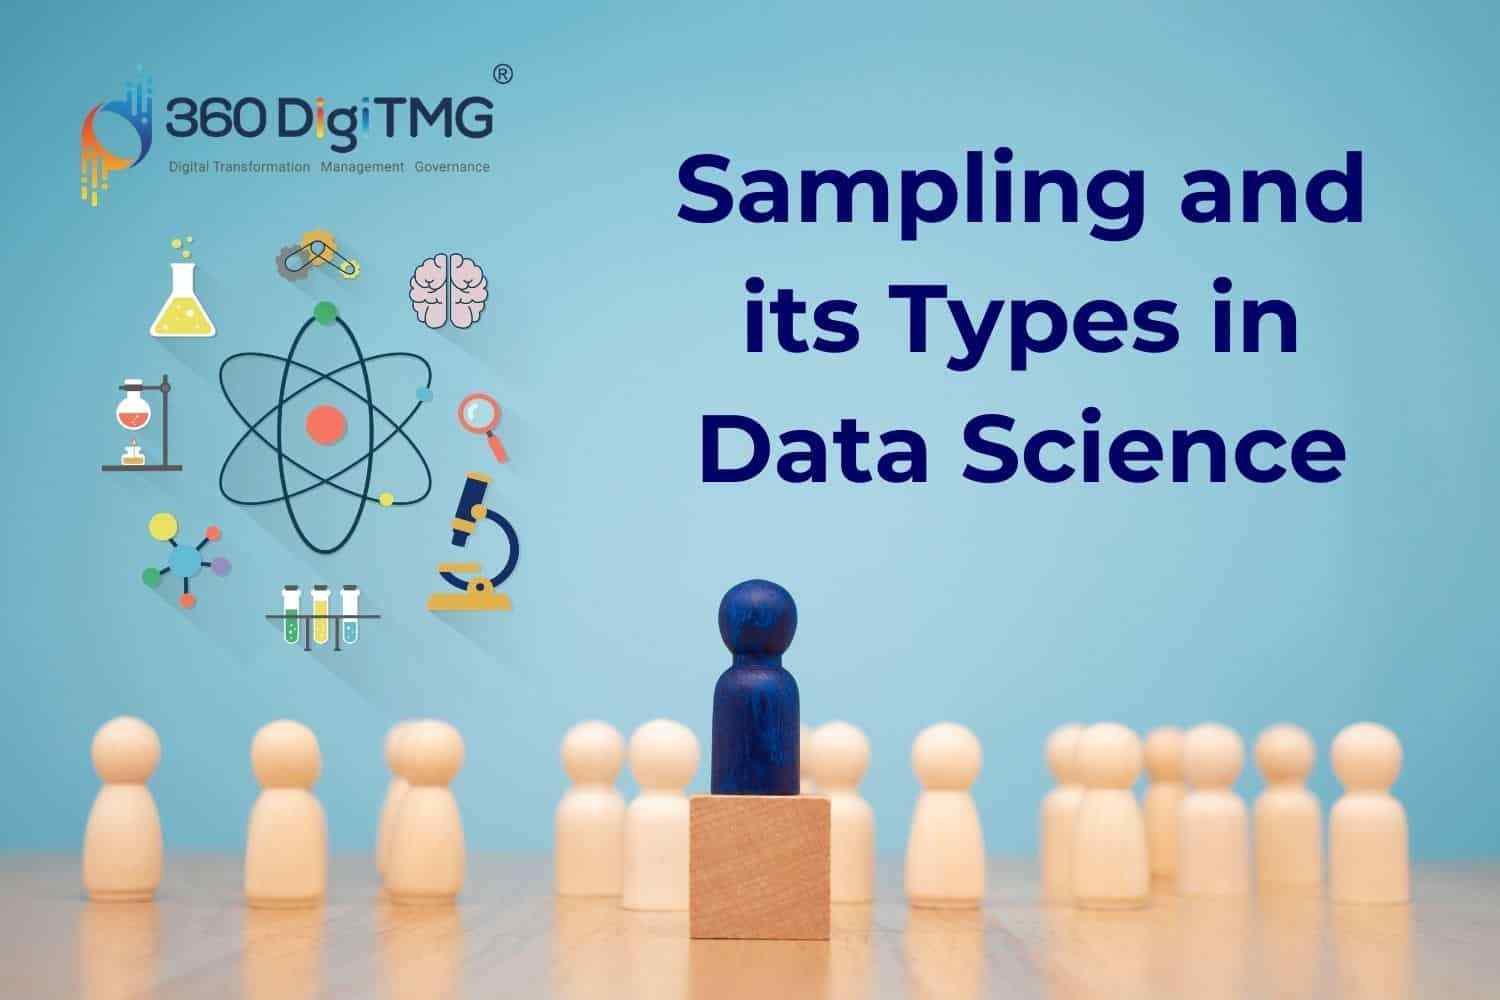 Sampling and its Types in Data Science